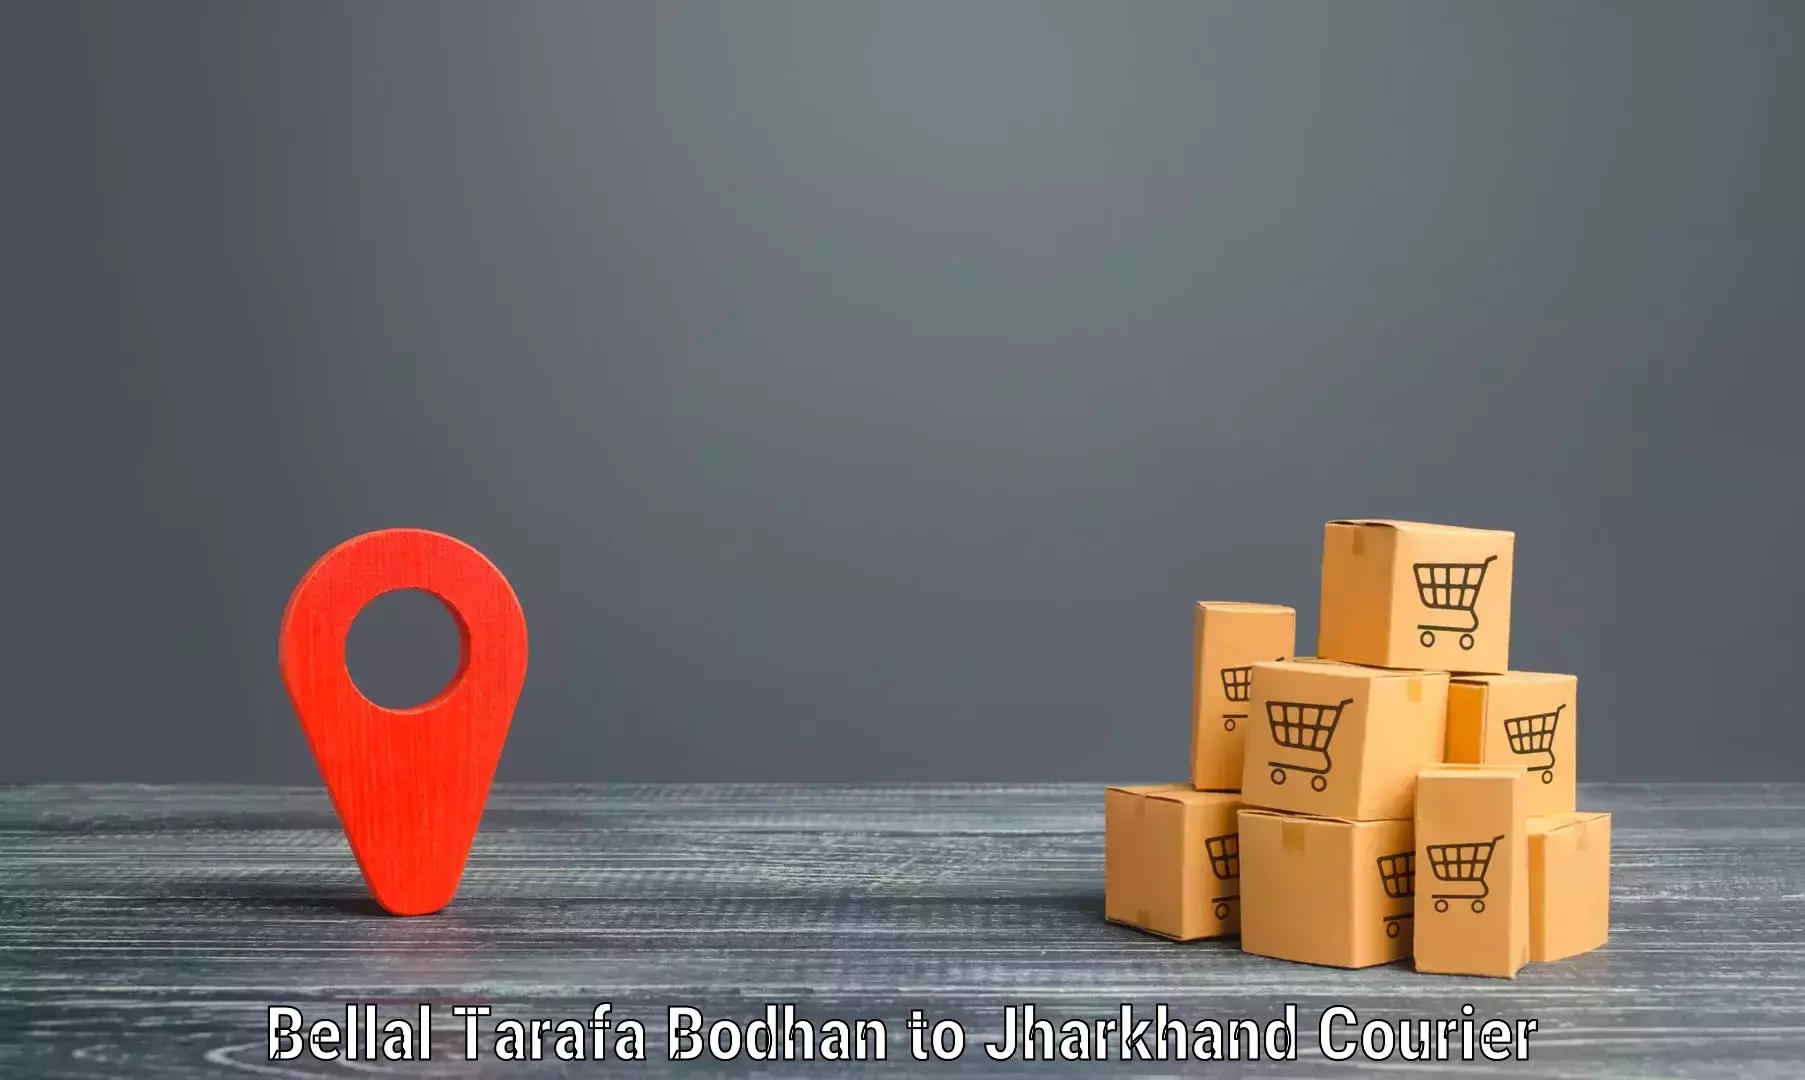 Personal parcel delivery in Bellal Tarafa Bodhan to Madhupur